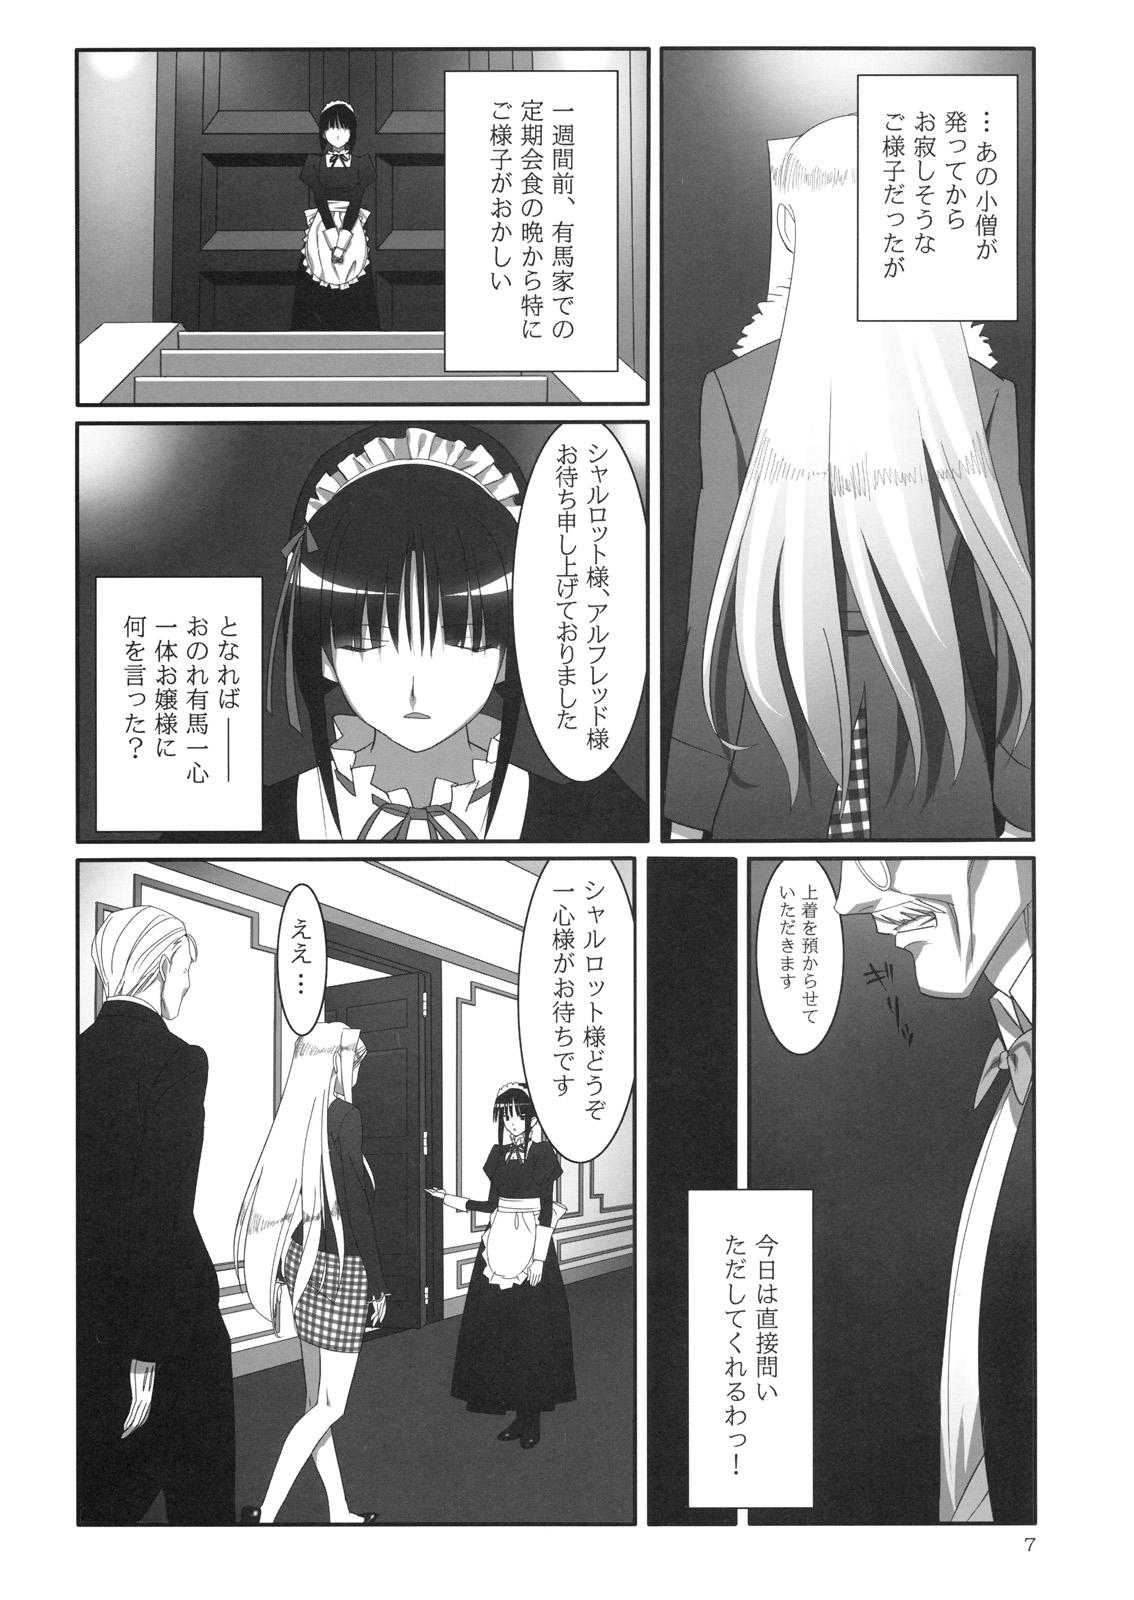 Money Talks Admired beautiful flower. 2 - Princess lover Massages - Page 6